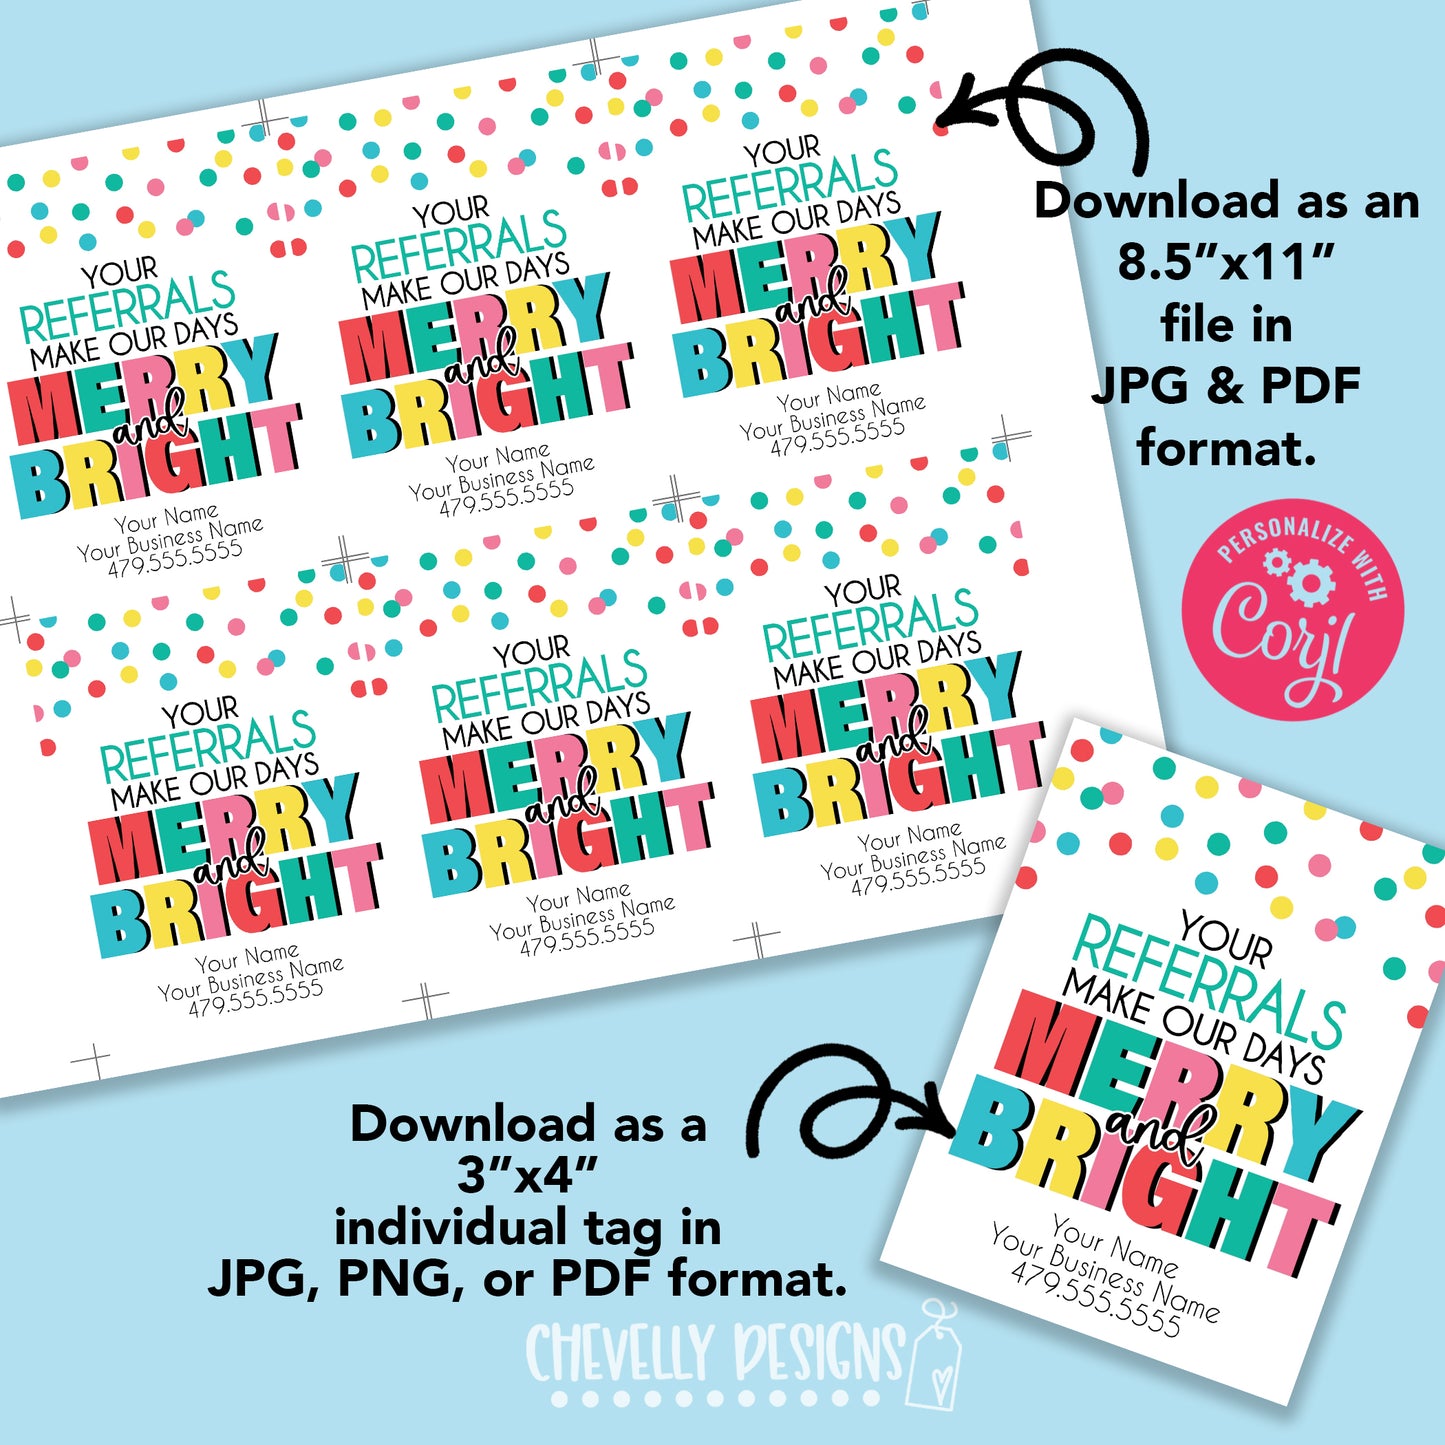 Editable - Your Referrals Make Our Days Merry and Bright - Printable Gift Tags - Digital File